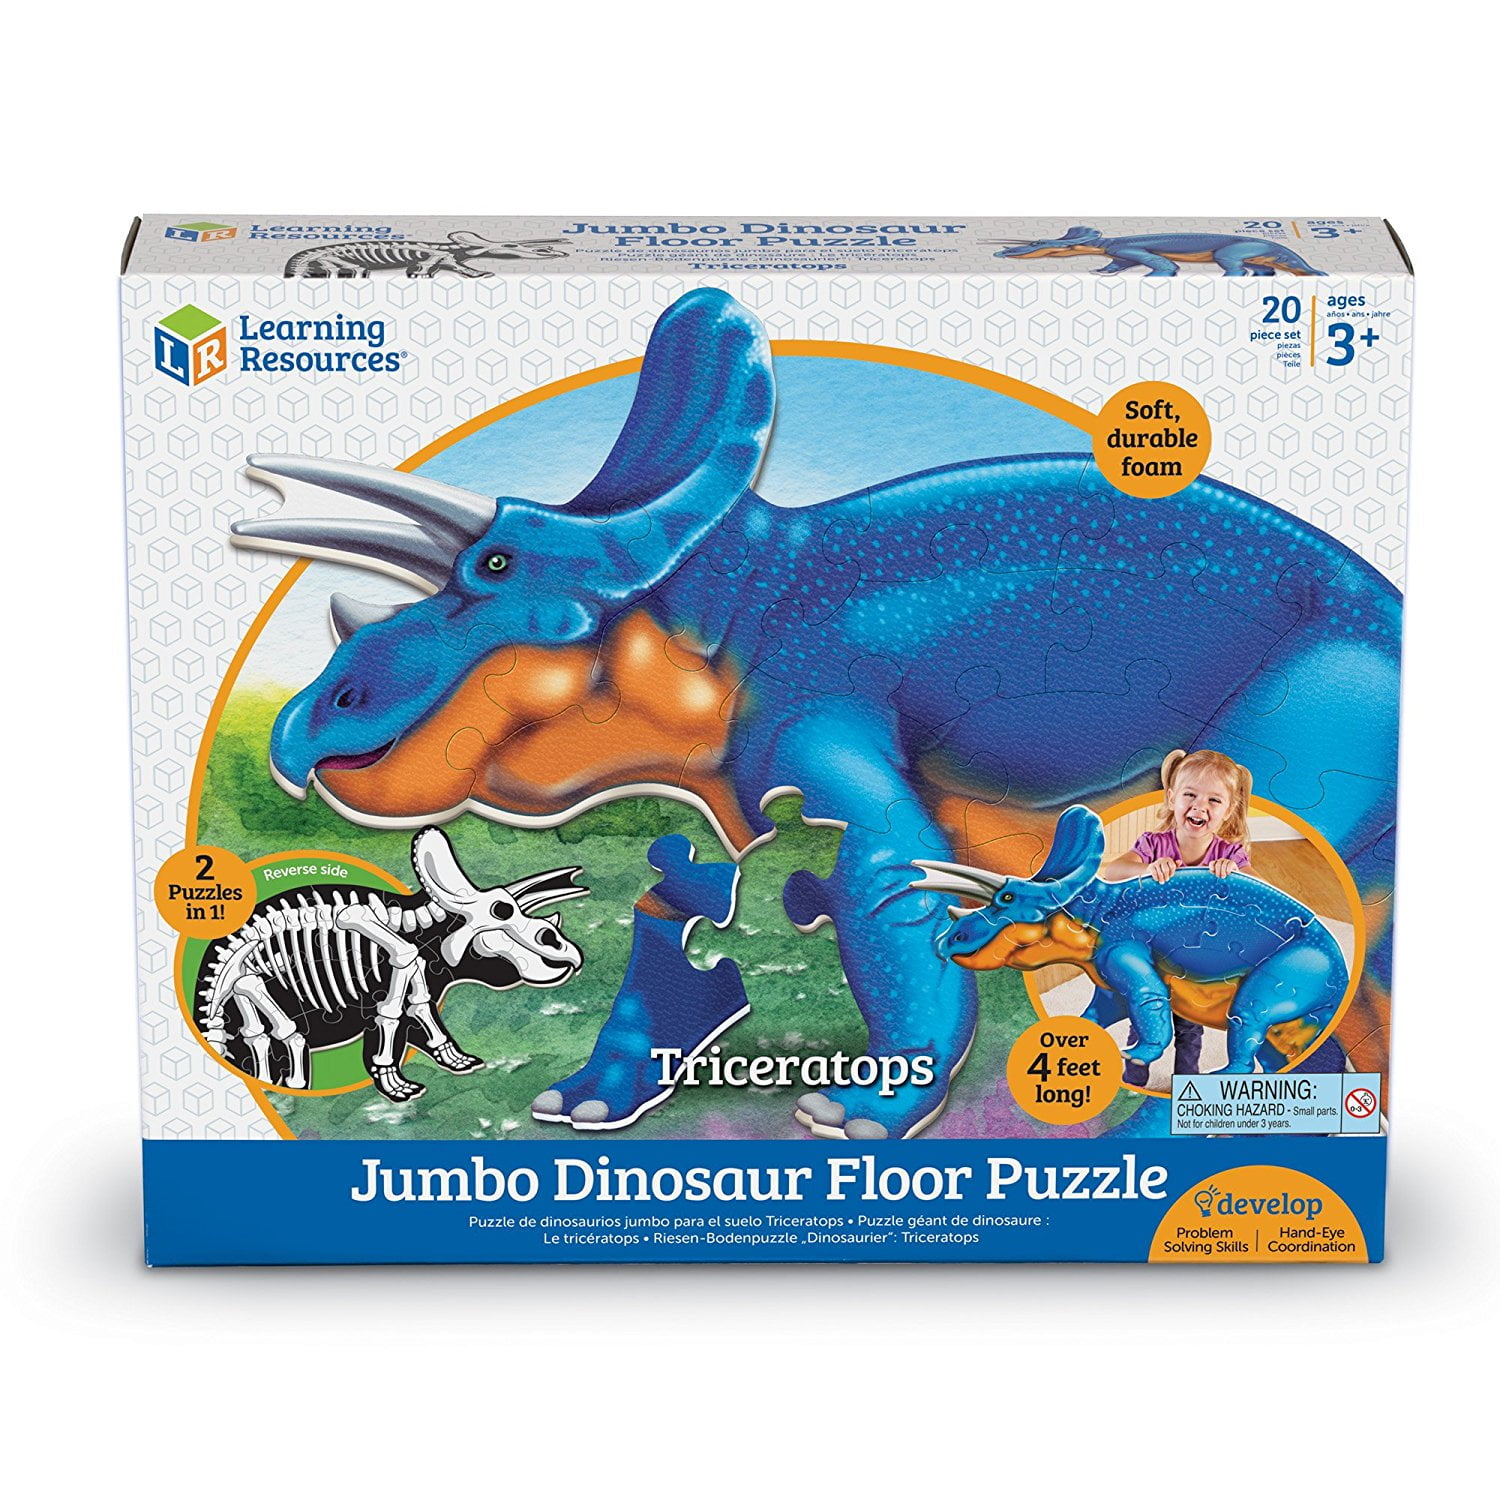 National History Museum Fun Kids Game **FREE DELIVERY** DINOSAUR JIGSAW PUZZLE 